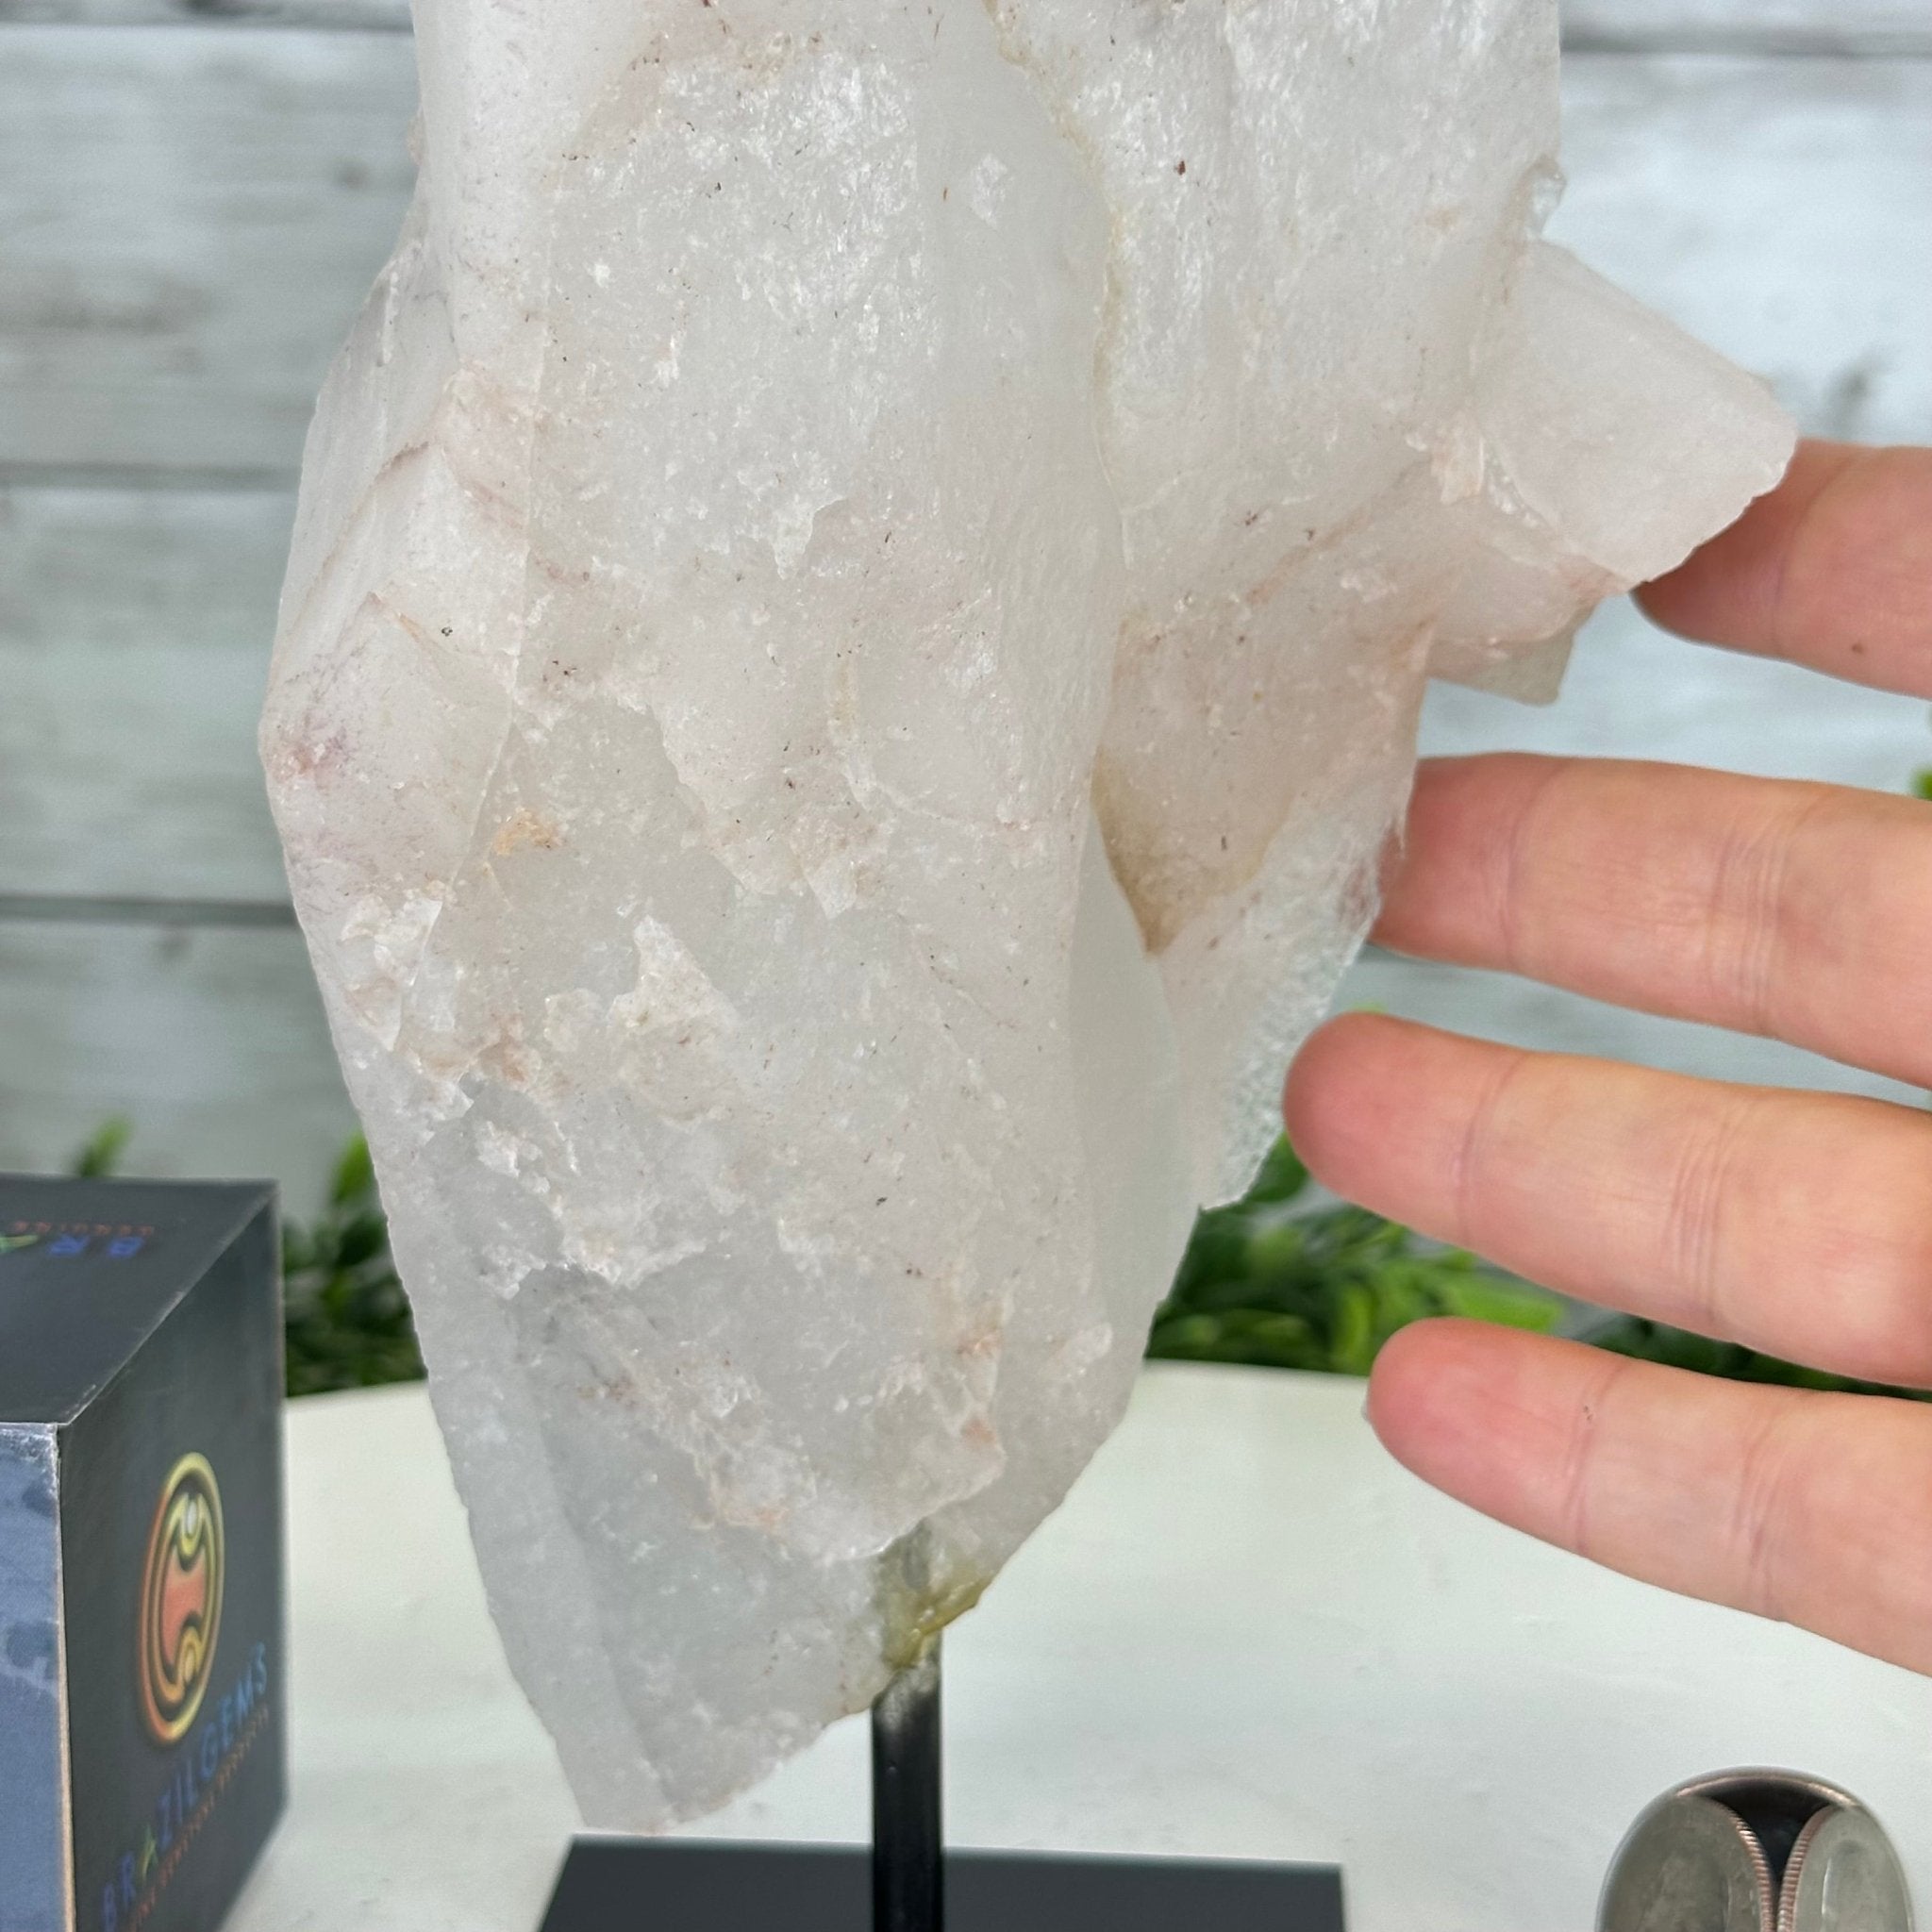 Clear Quartz Crystal Point on Fixed Base, 4.6 lbs & 11.0" Tall #3122CQ-008 - Brazil GemsBrazil GemsClear Quartz Crystal Point on Fixed Base, 4.6 lbs & 11.0" Tall #3122CQ-008Crystal Points3122CQ-008